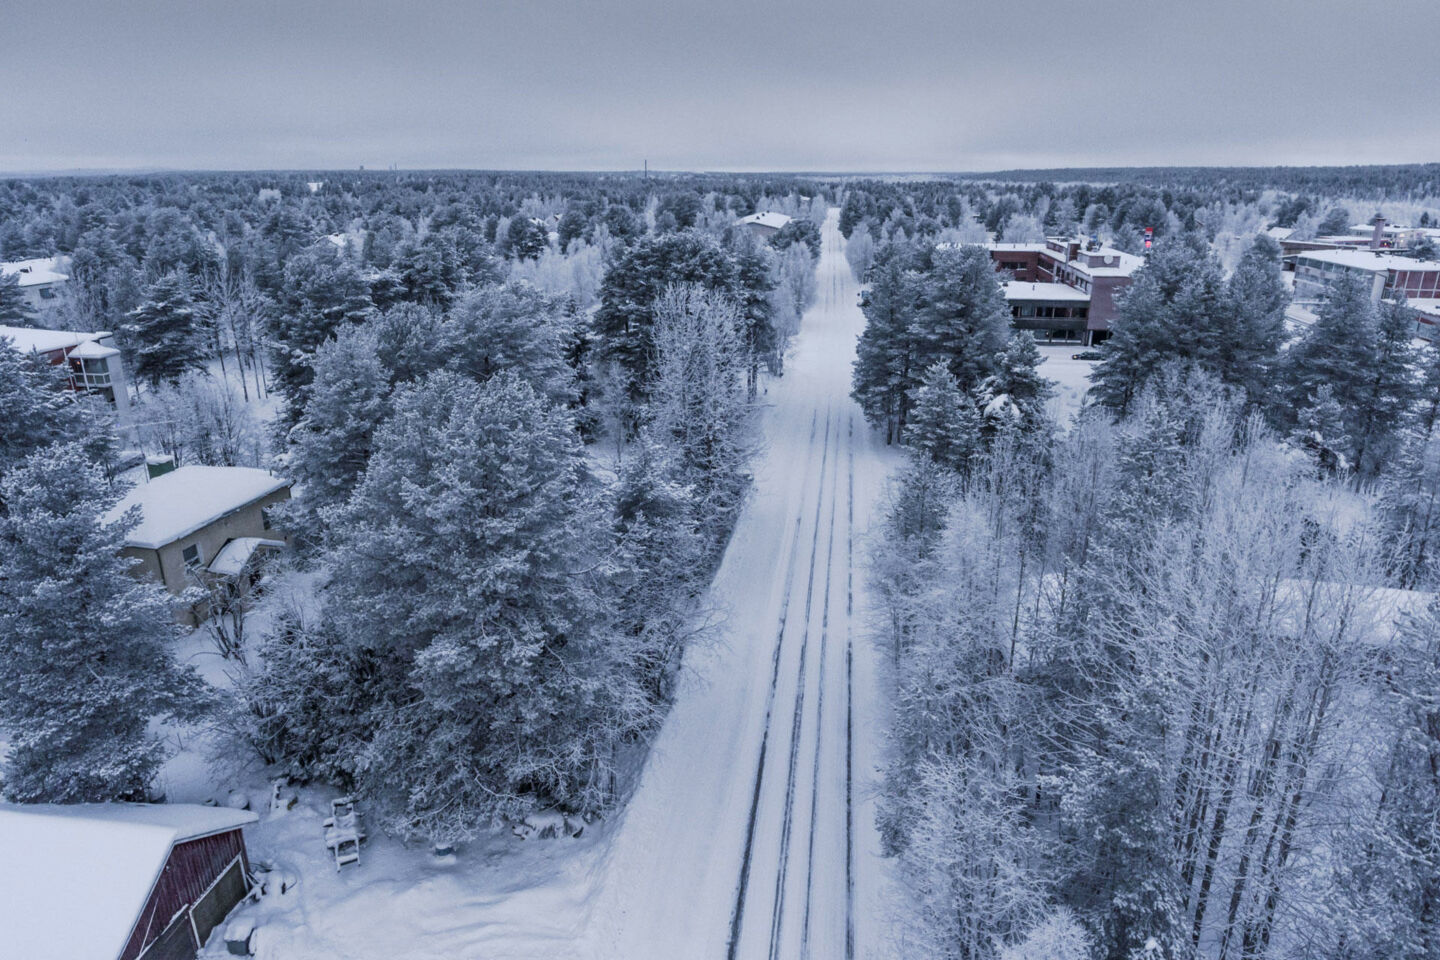 Snow-covered retro town of Sodankylä, a filming location in Finnish Lapland